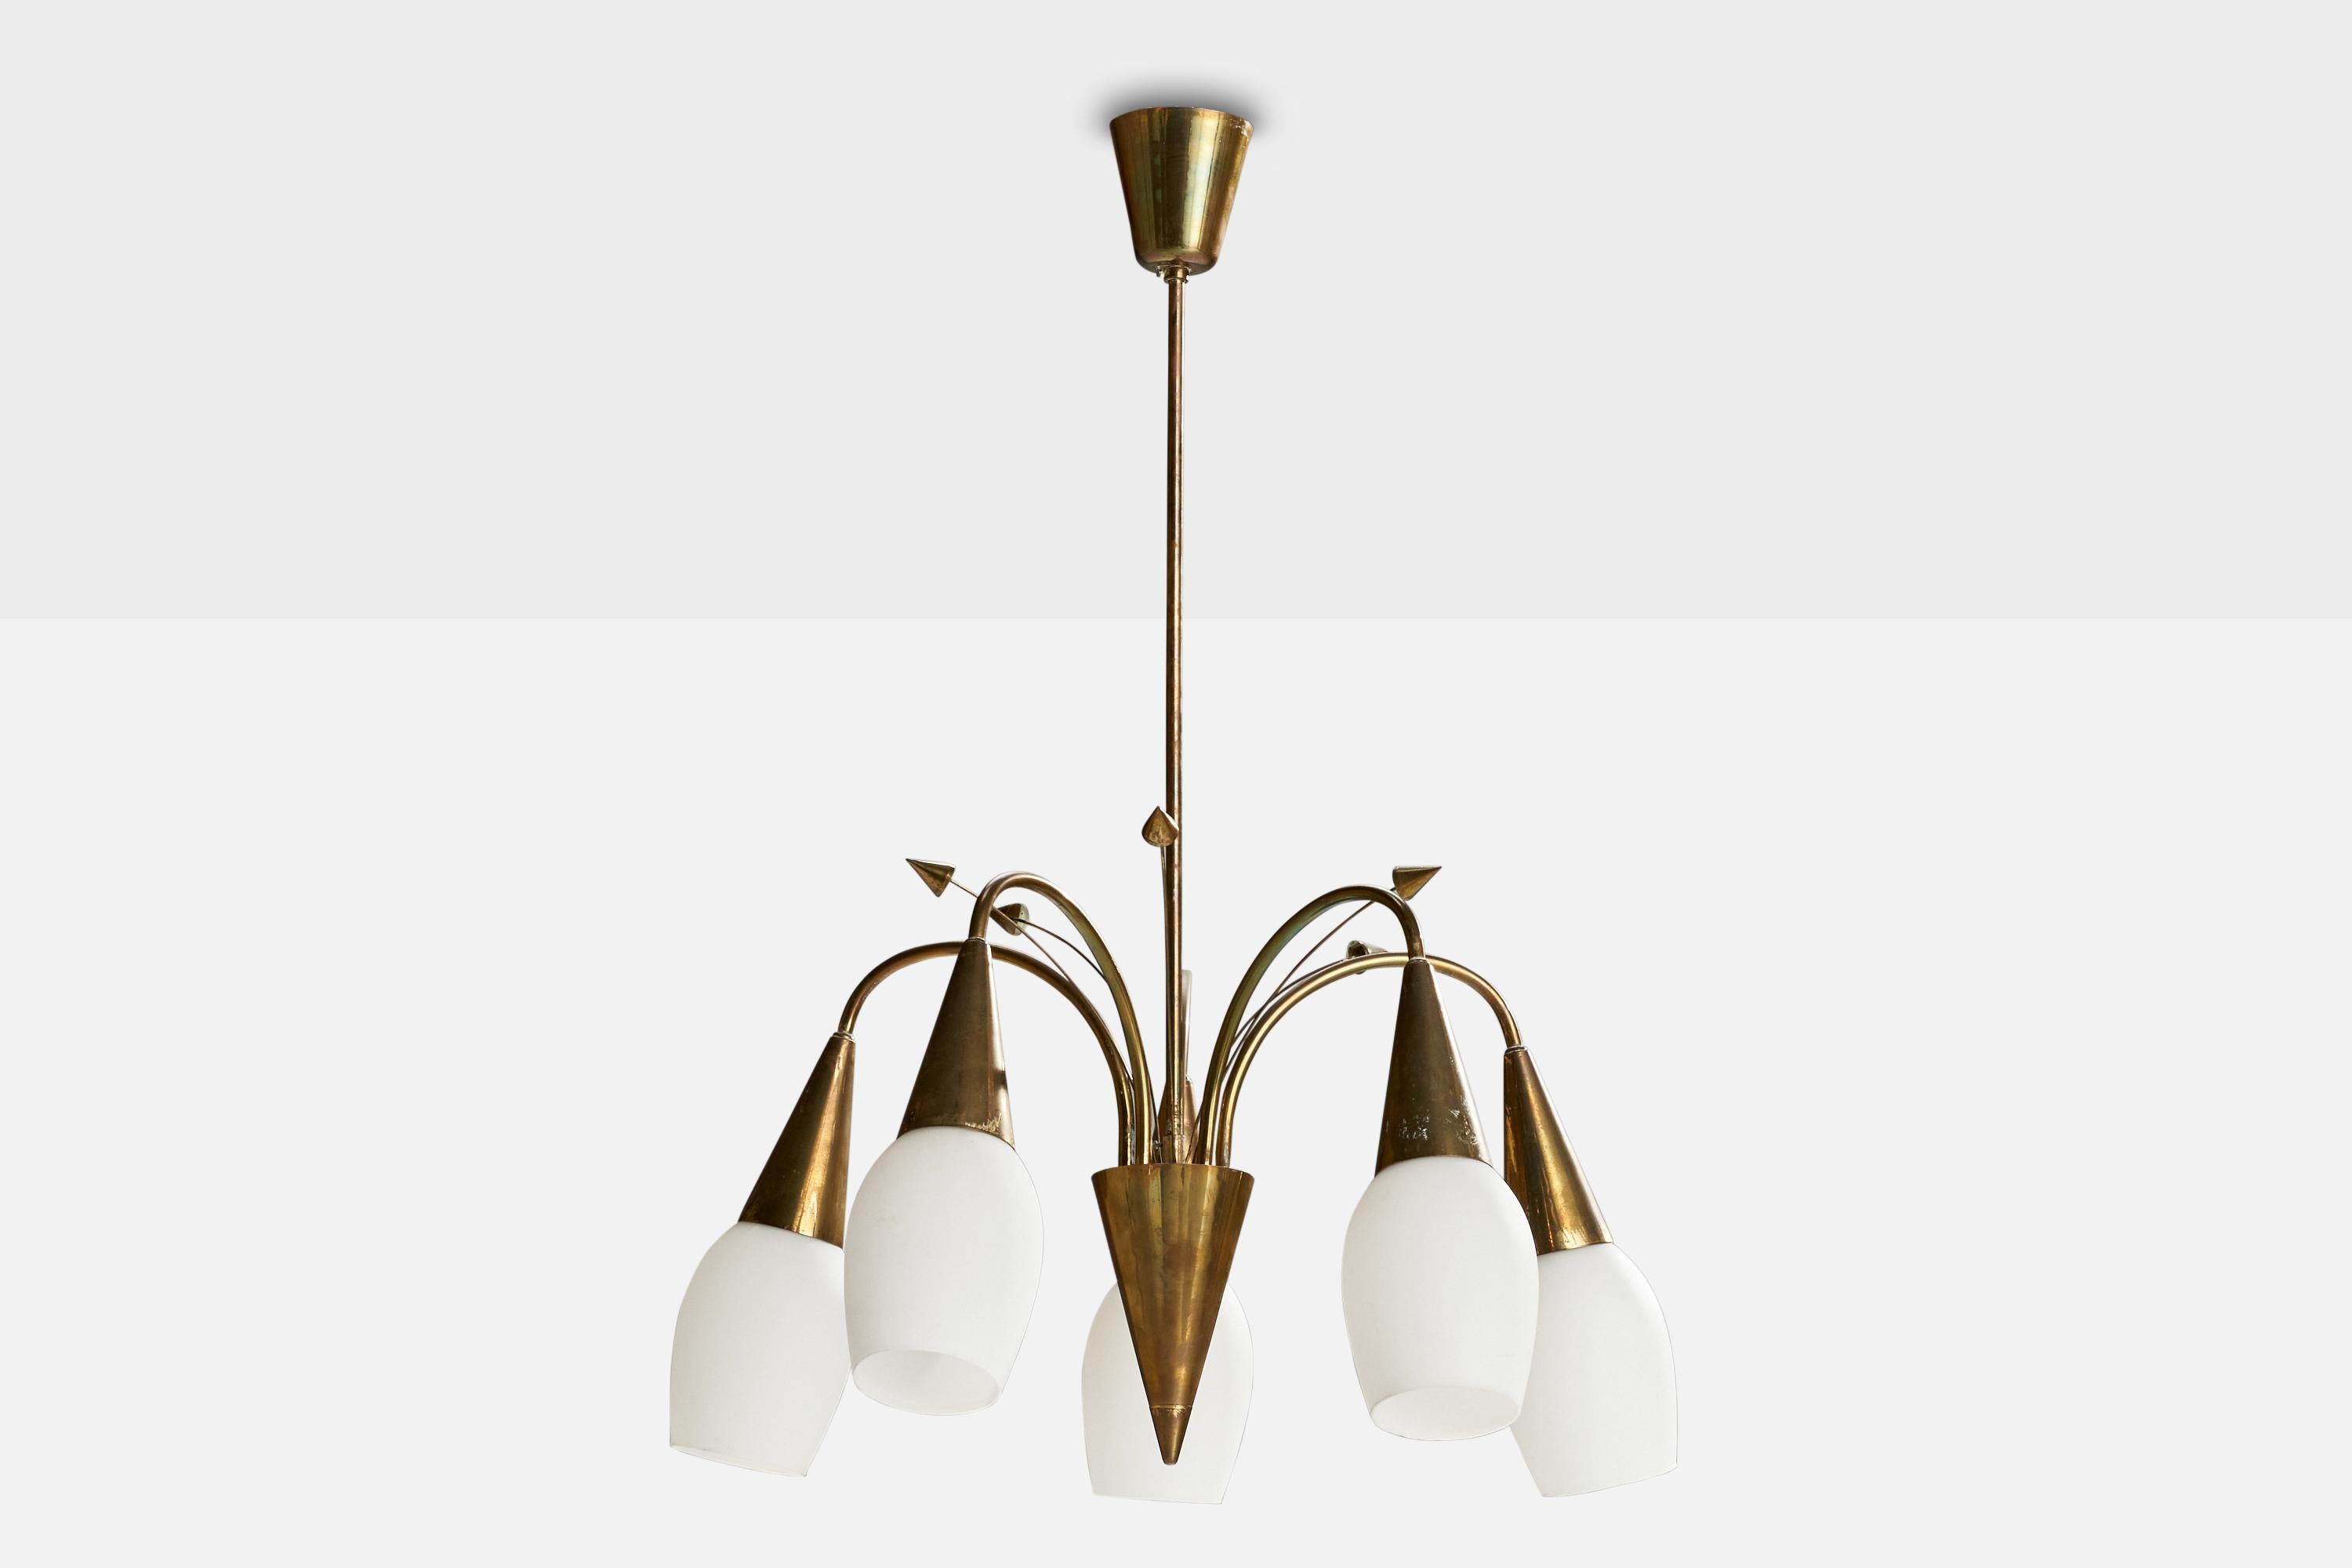 A brass and opaline glass chandelier designed and produced by PSO, Finland, 1940s.

Dimensions of canopy (inches): 3.75” H x 3.5” Diameter
Socket takes standard E-26 bulbs. 5 socket.There is no maximum wattage stated on the fixture. All lighting